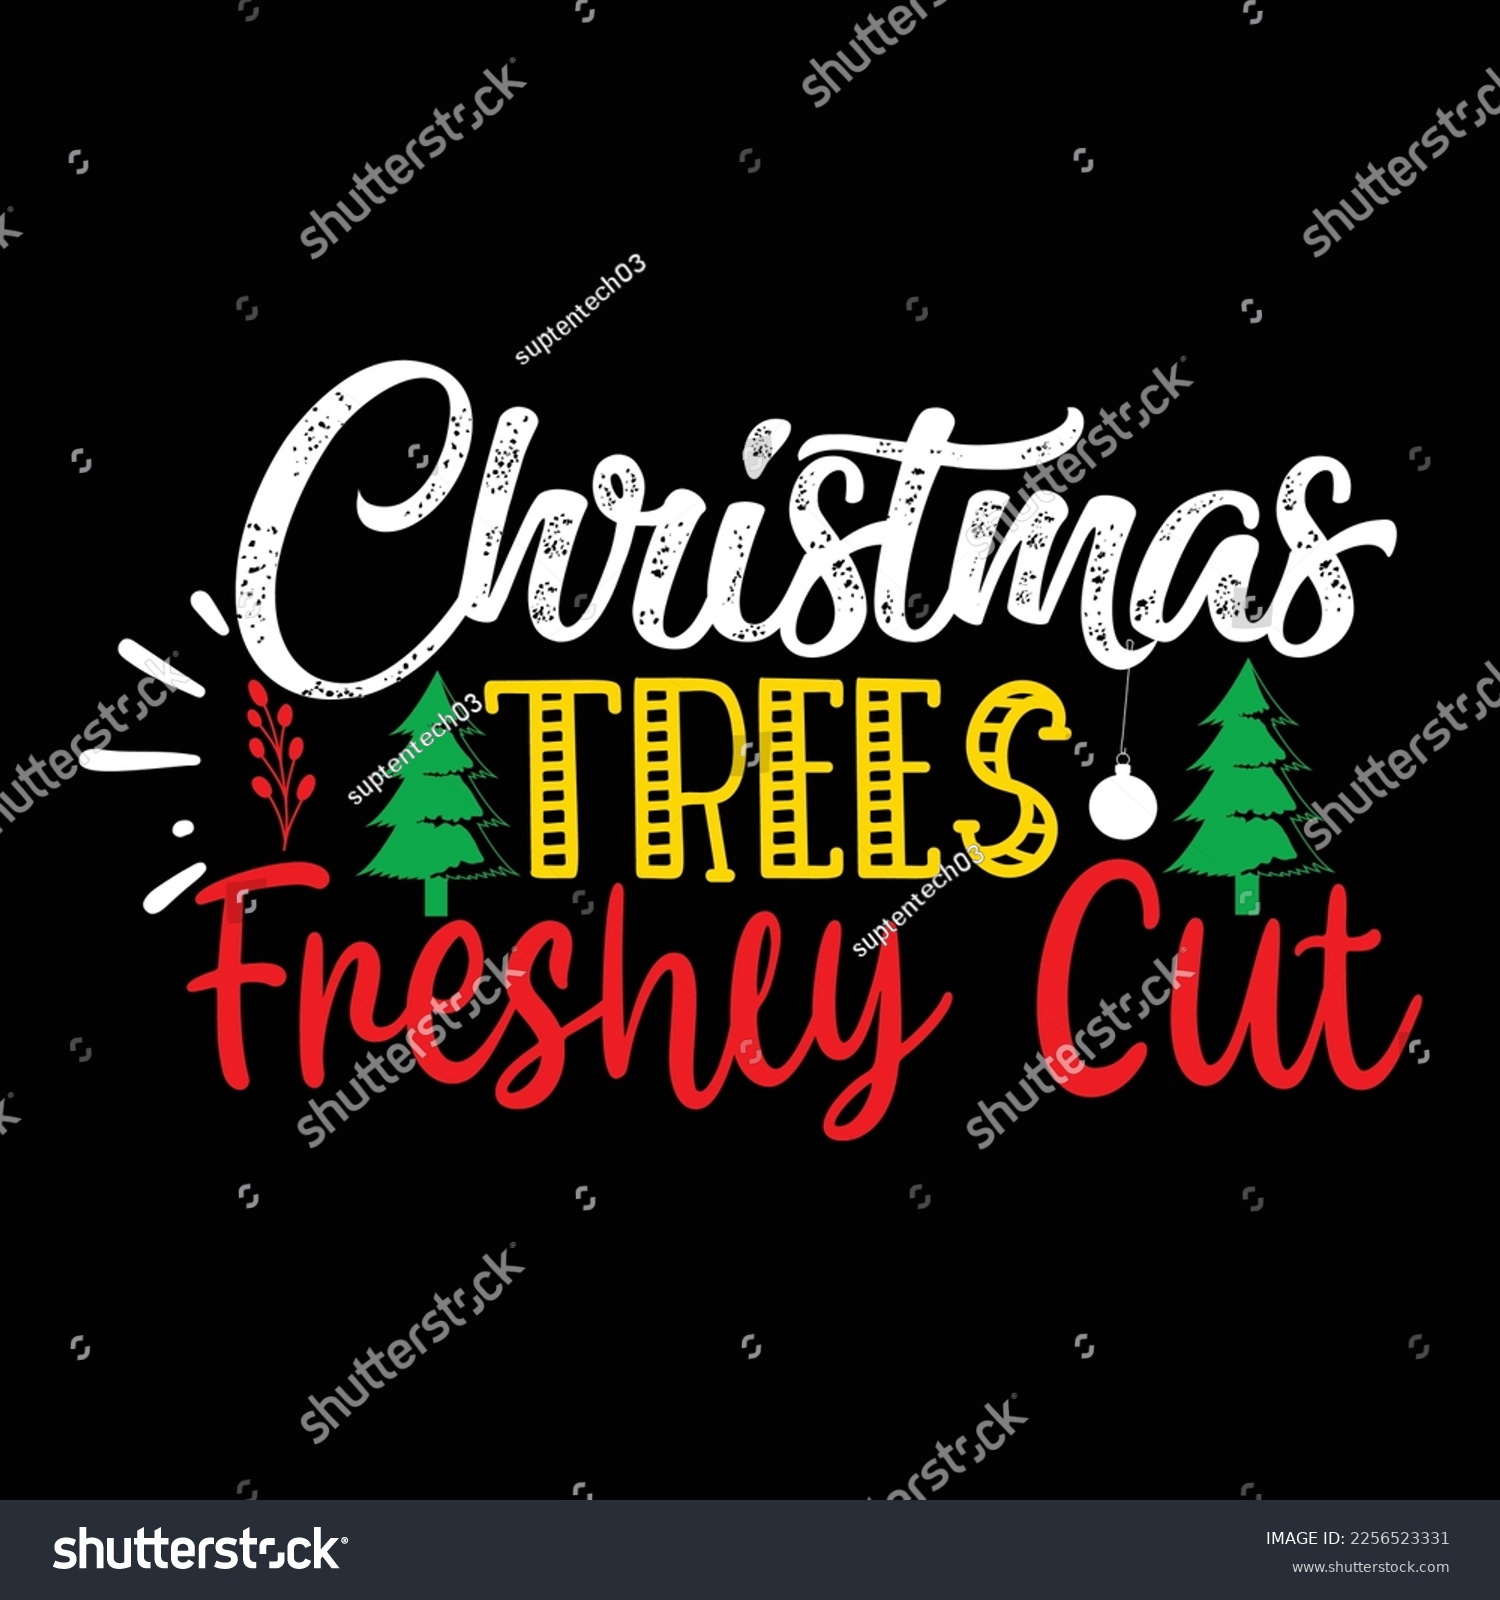 SVG of Christmas Trees Freshly Cut, Merry Christmas shirts Print Template, Xmas Ugly Snow Santa Clouse New Year Holiday Candy Santa Hat vector illustration for Christmas hand lettered svg